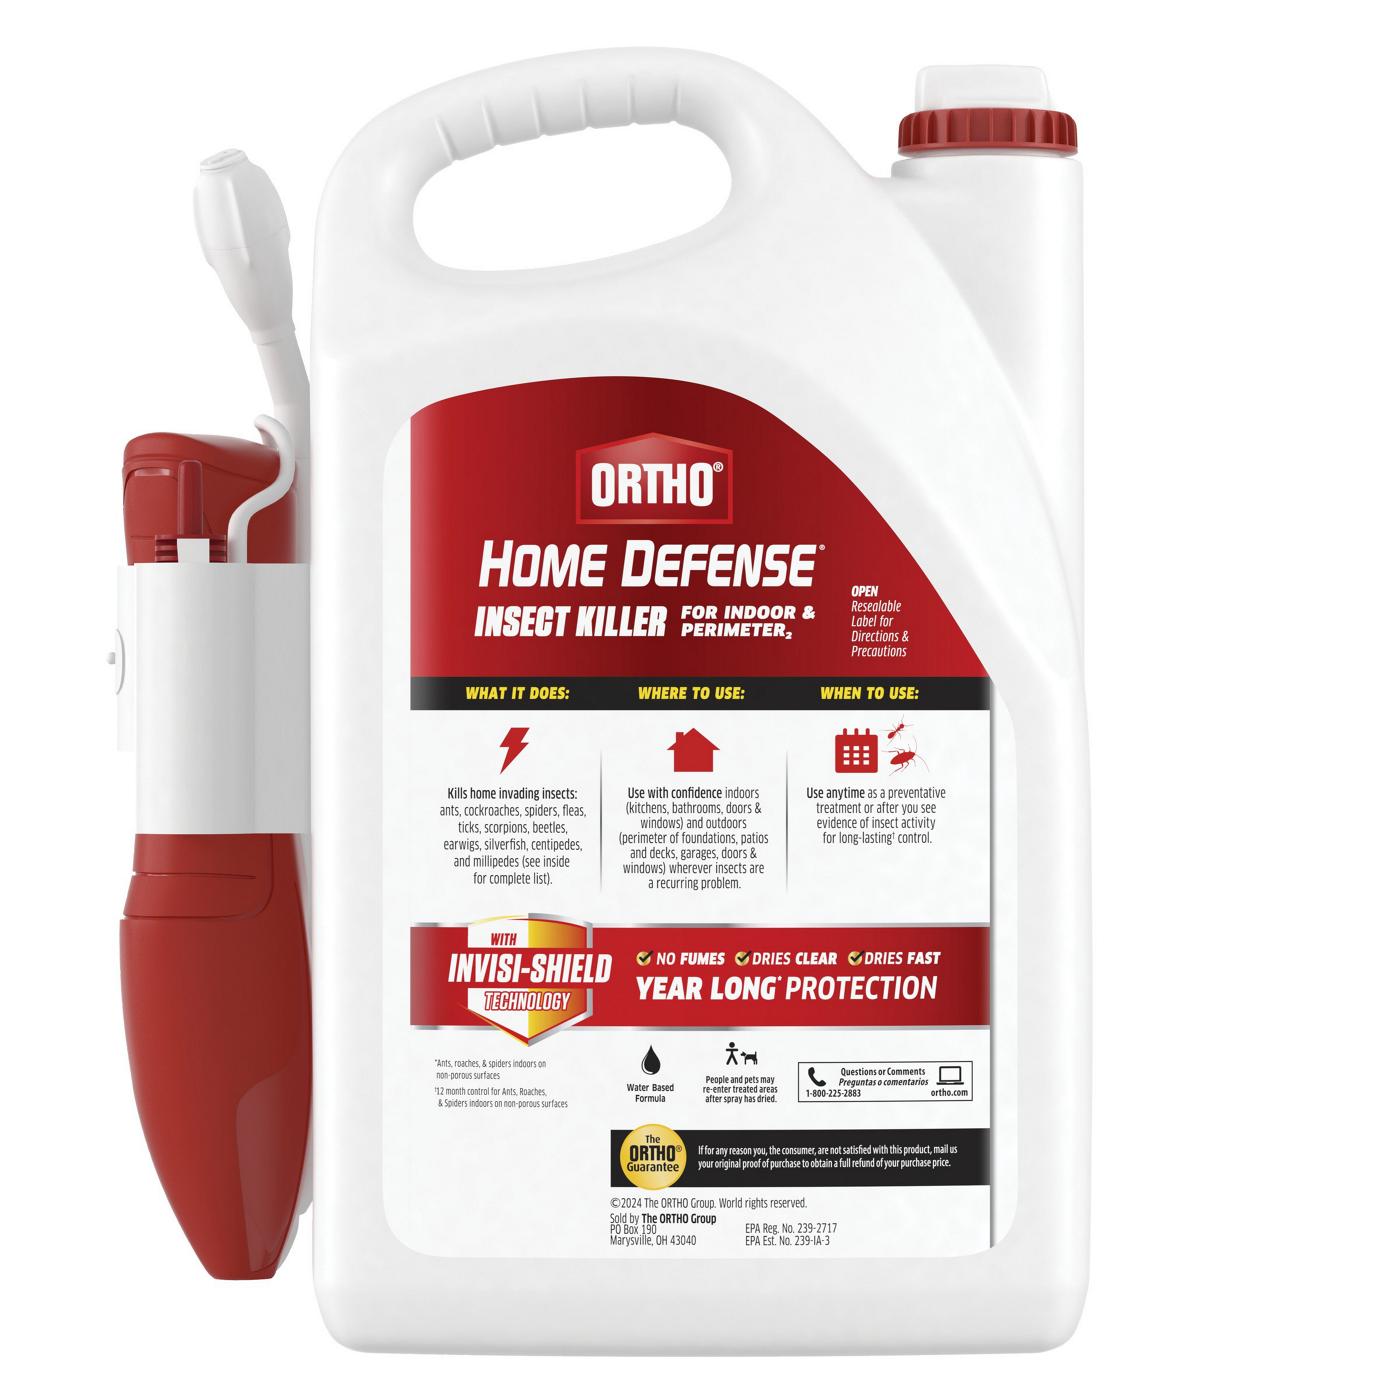 Ortho Home Defense Insect Killer; image 3 of 3